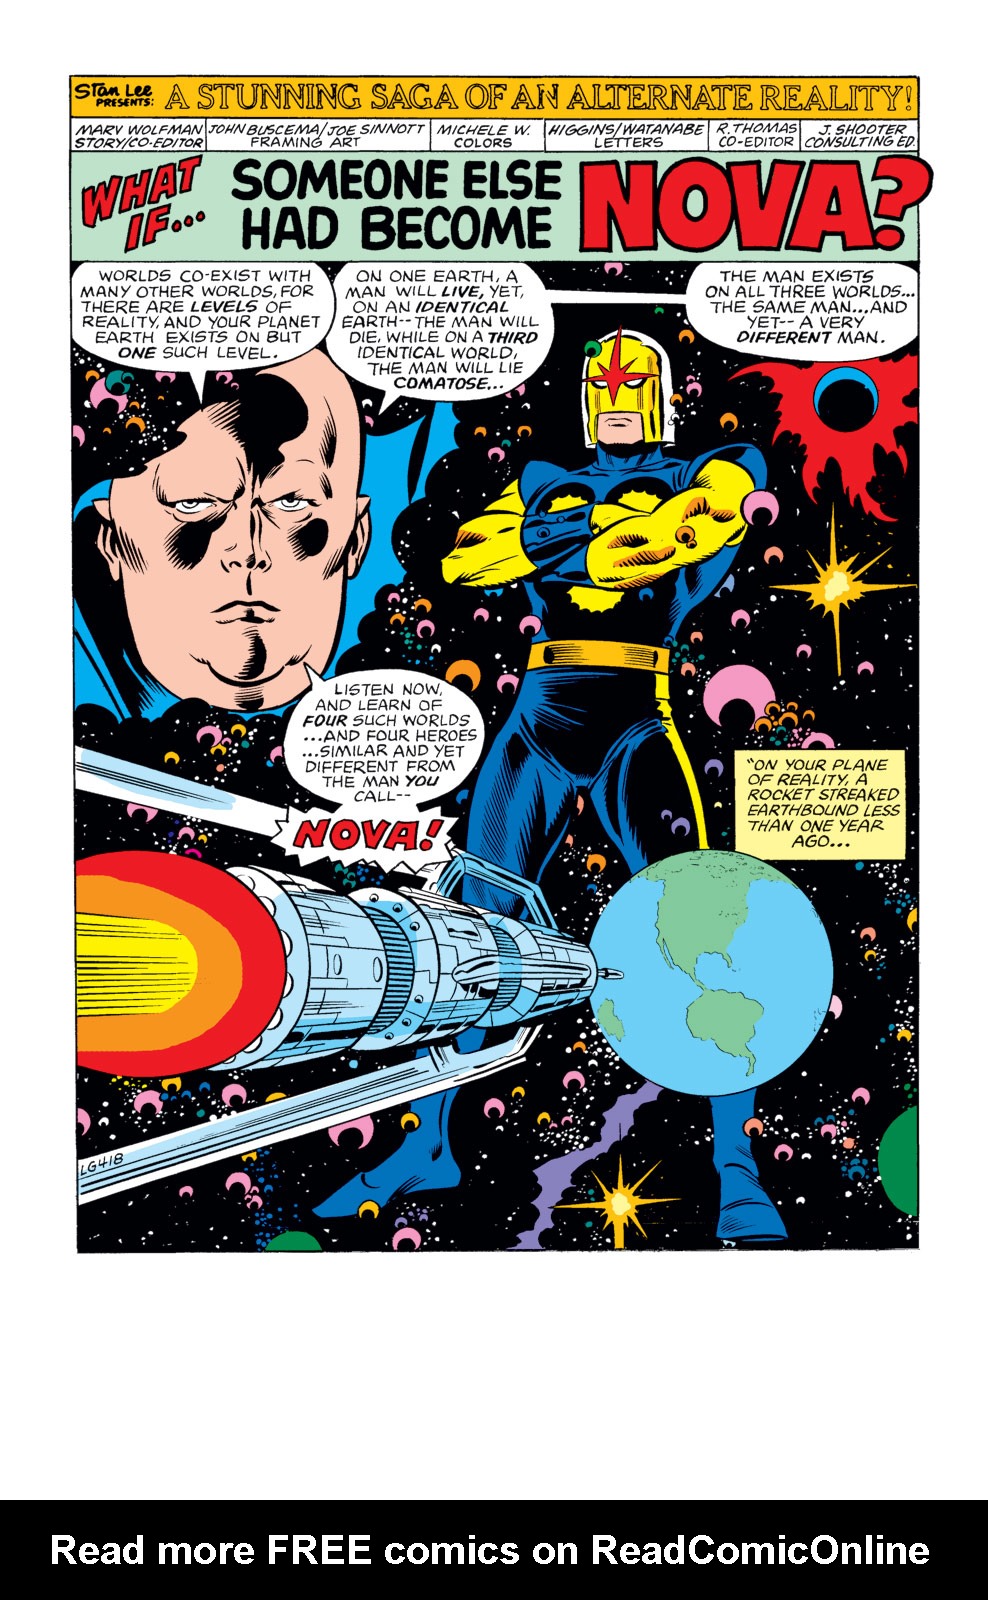 What If? (1977) Issue #15 - Nova had been four other people #15 - English 2